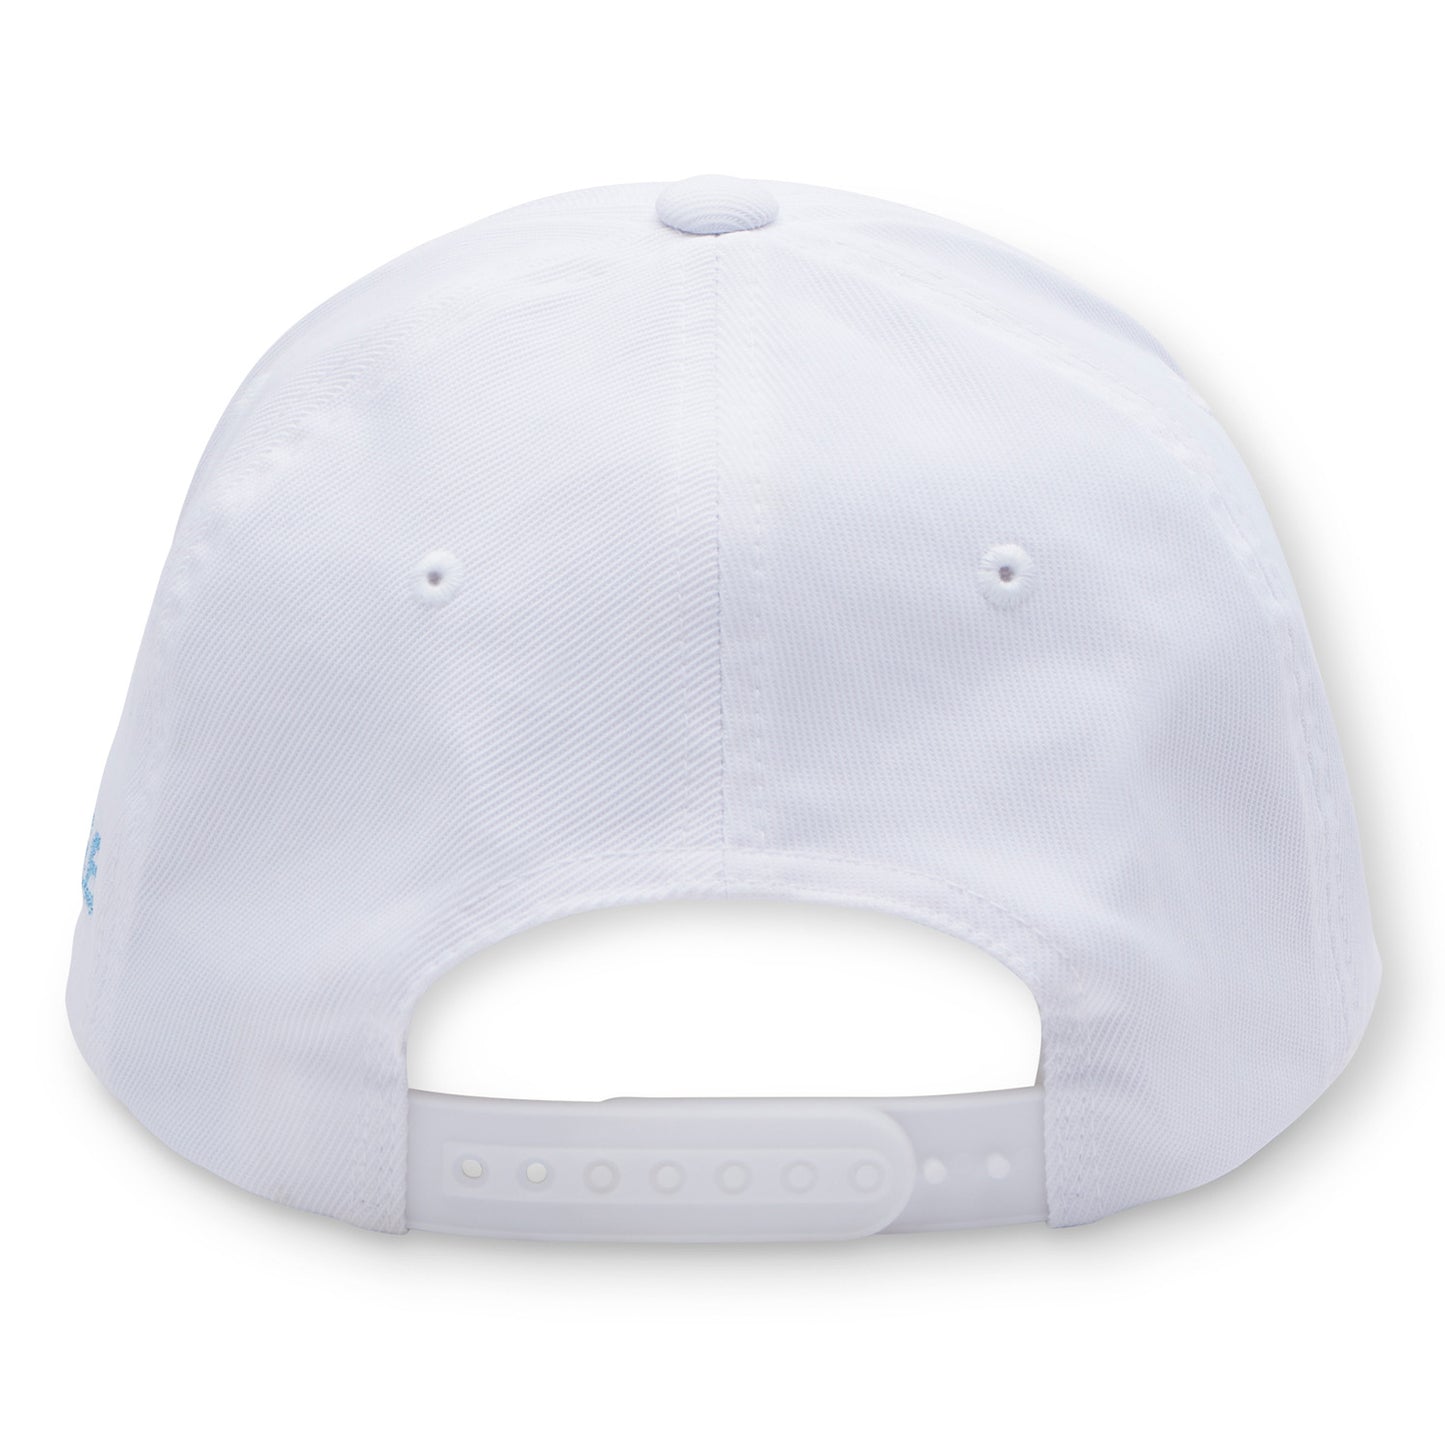 CIRCLE G'S STRETCH TWILL SNAPBACK HAT - G4AS22H03XS - Gfore